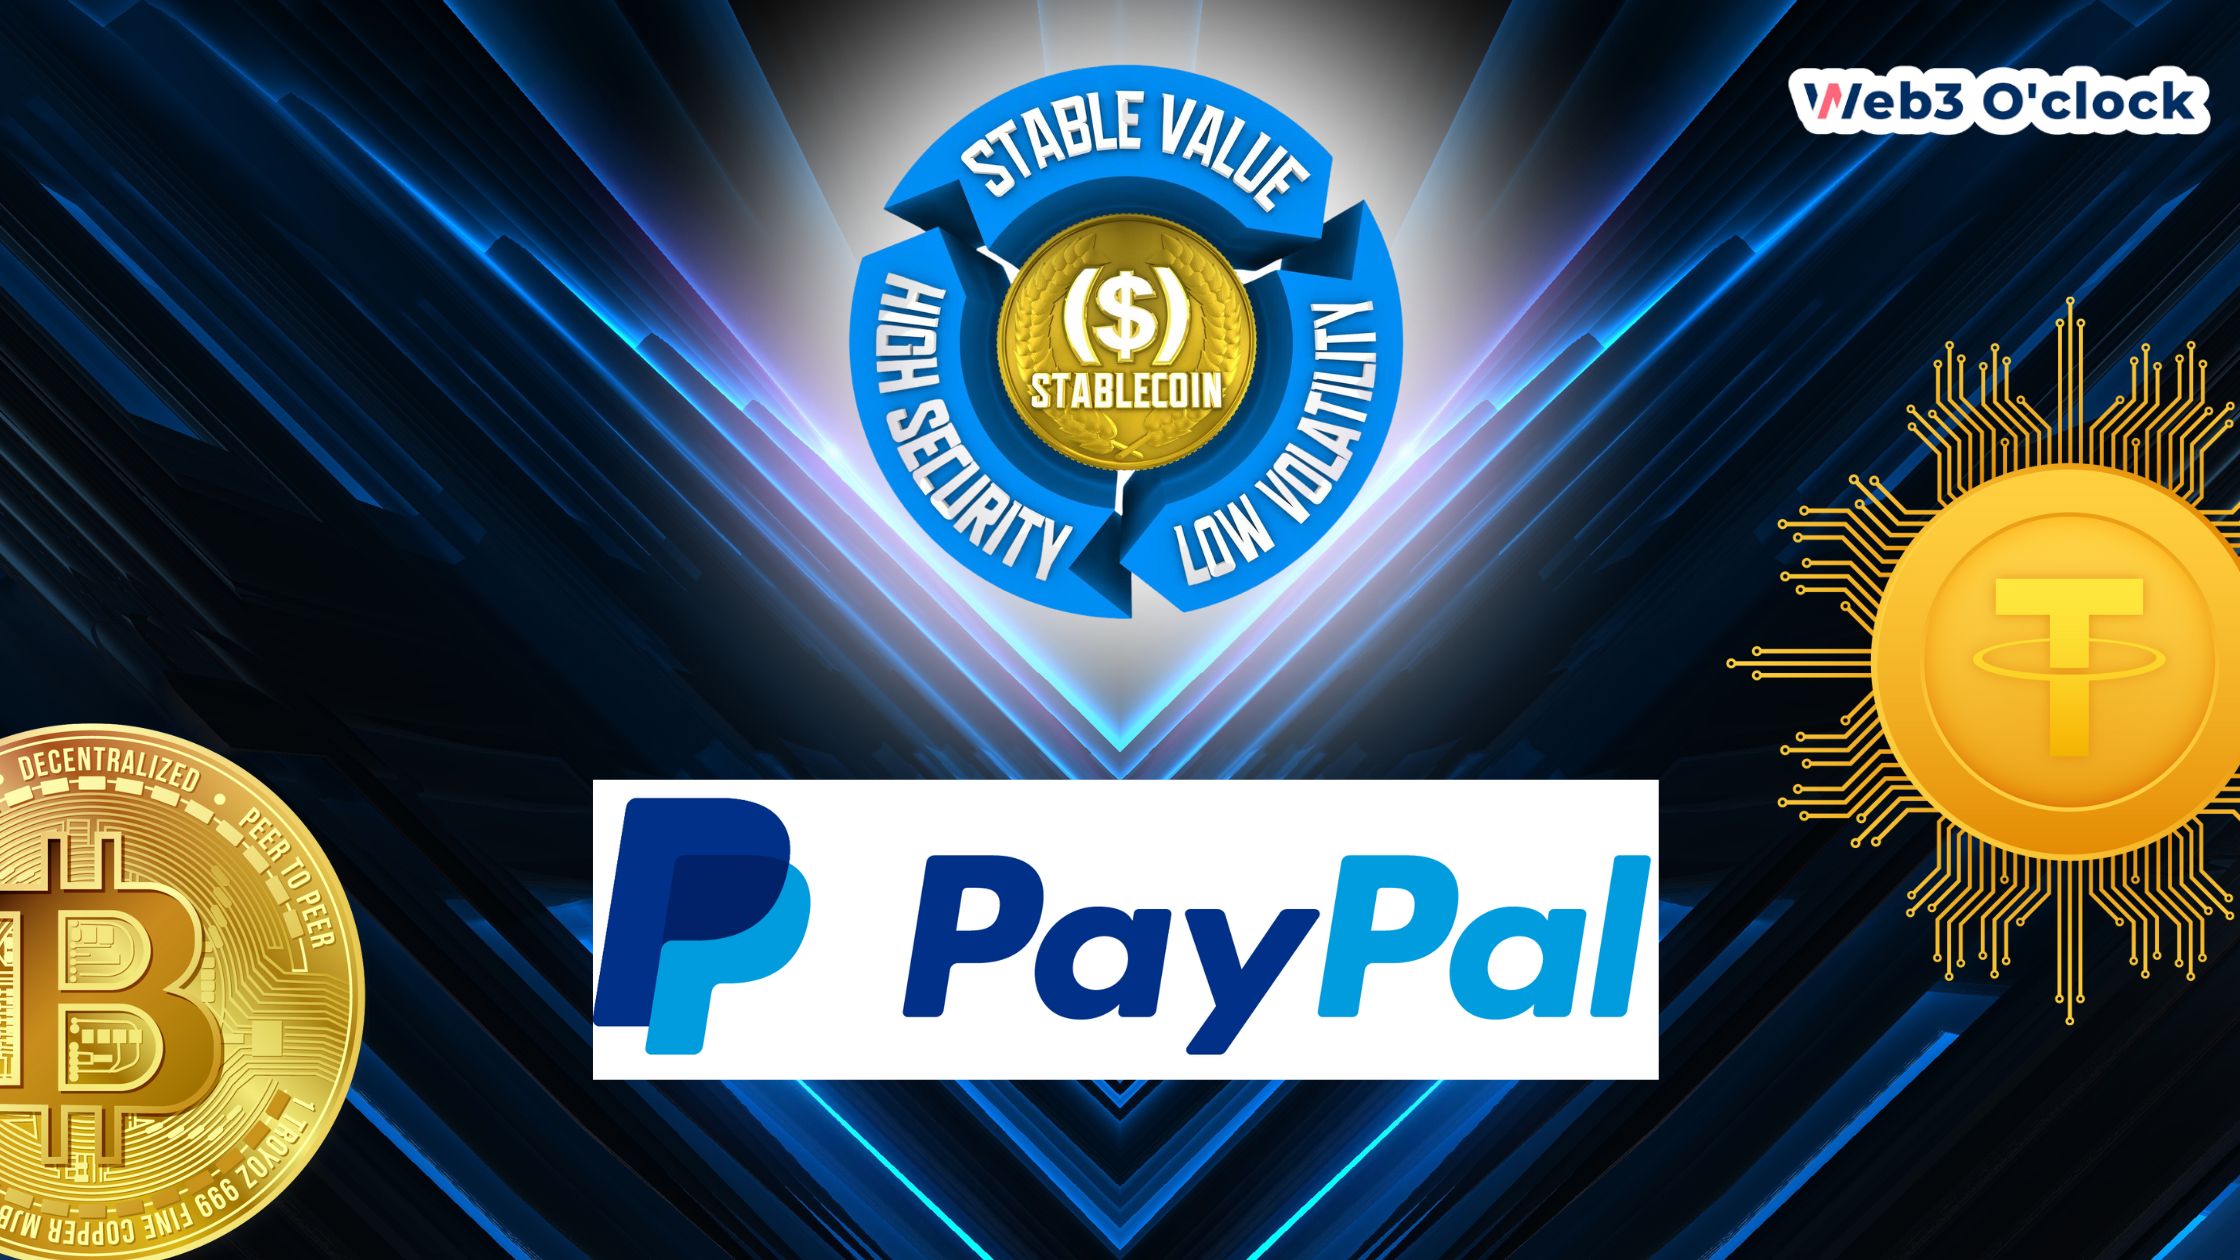 PayPal Unleashes PYUSD Stablecoin by web3oclock